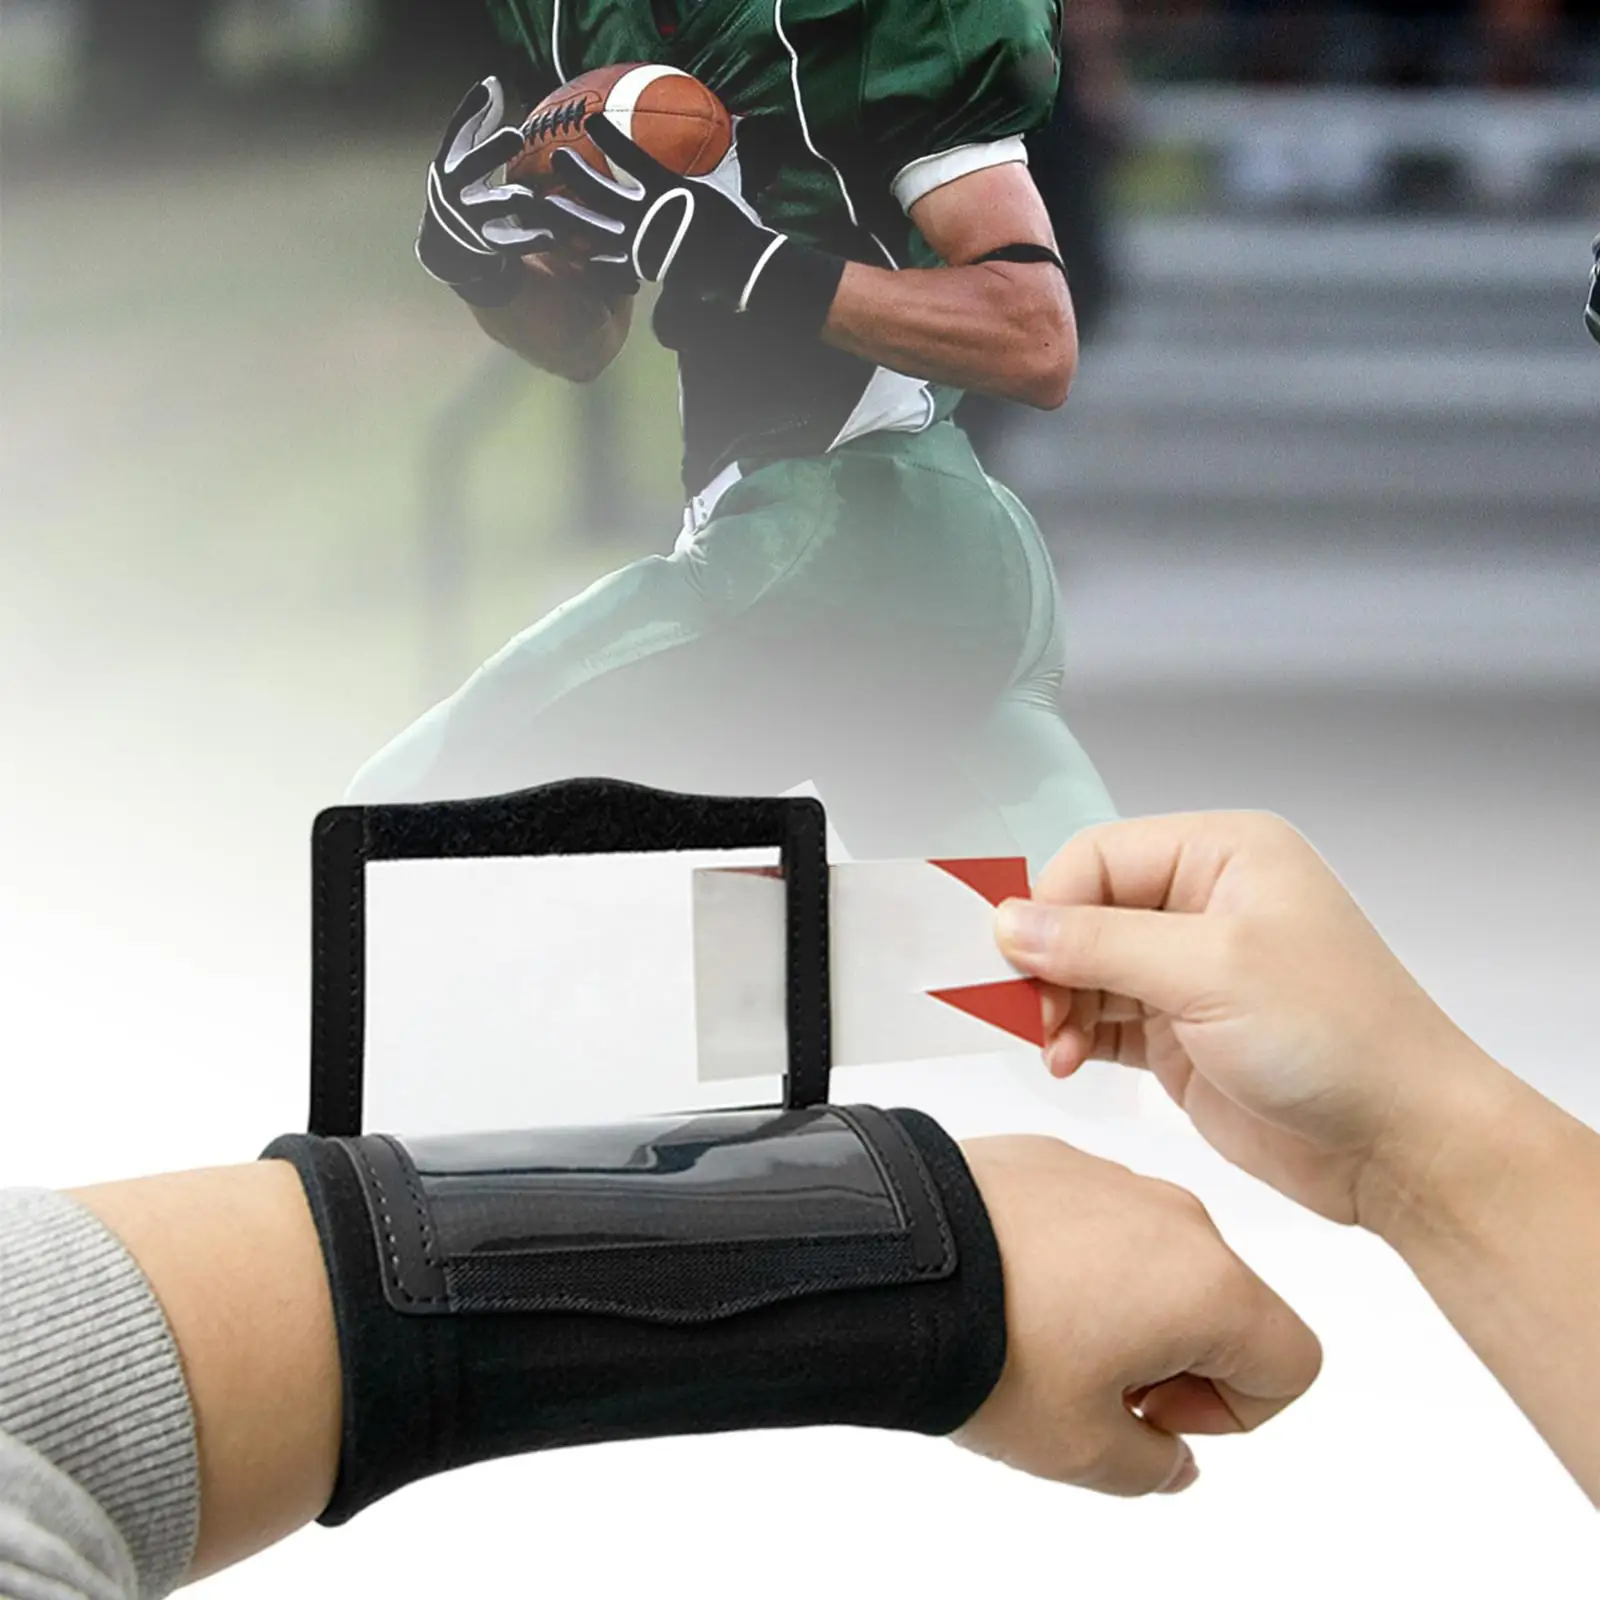 Football Play Wristbands Durable Football Wristbands Training Portable Adjustable Playbook Wristband for Sports Soccer Kids